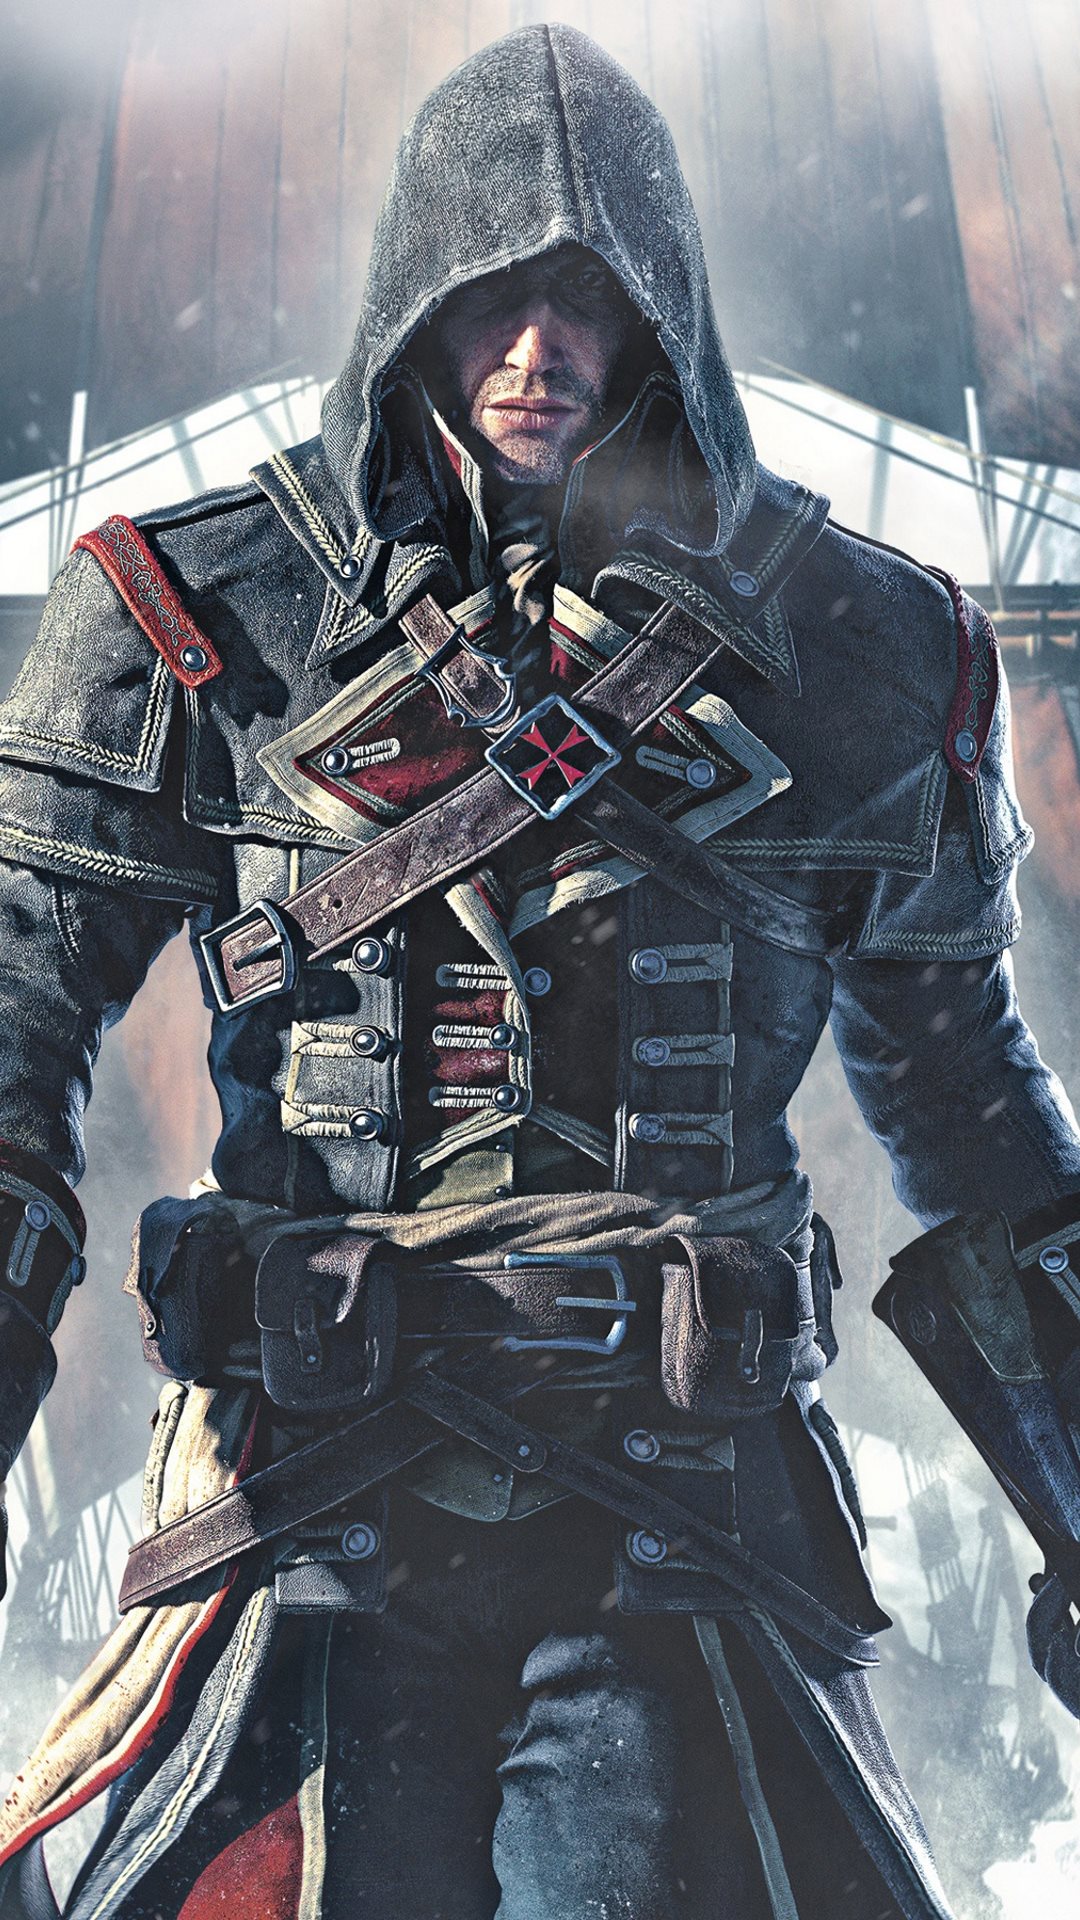 assassins creed phone Wallpapers